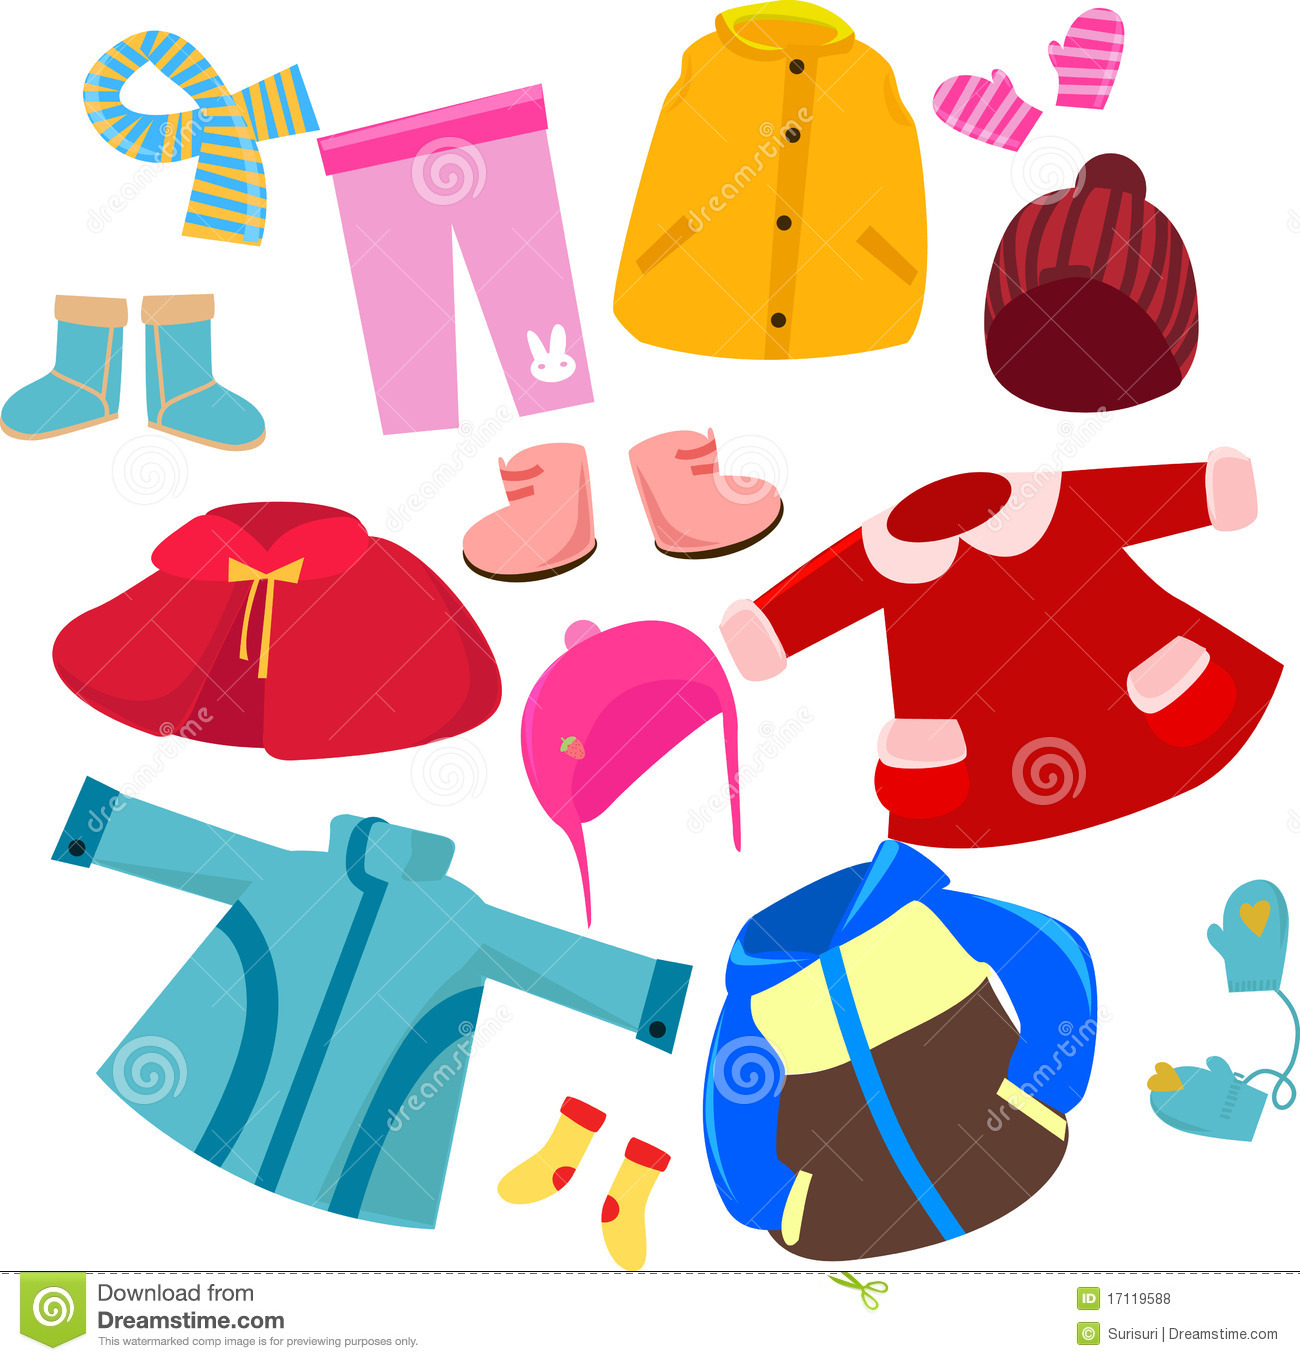 Blue Sweater Clipart Size: 66